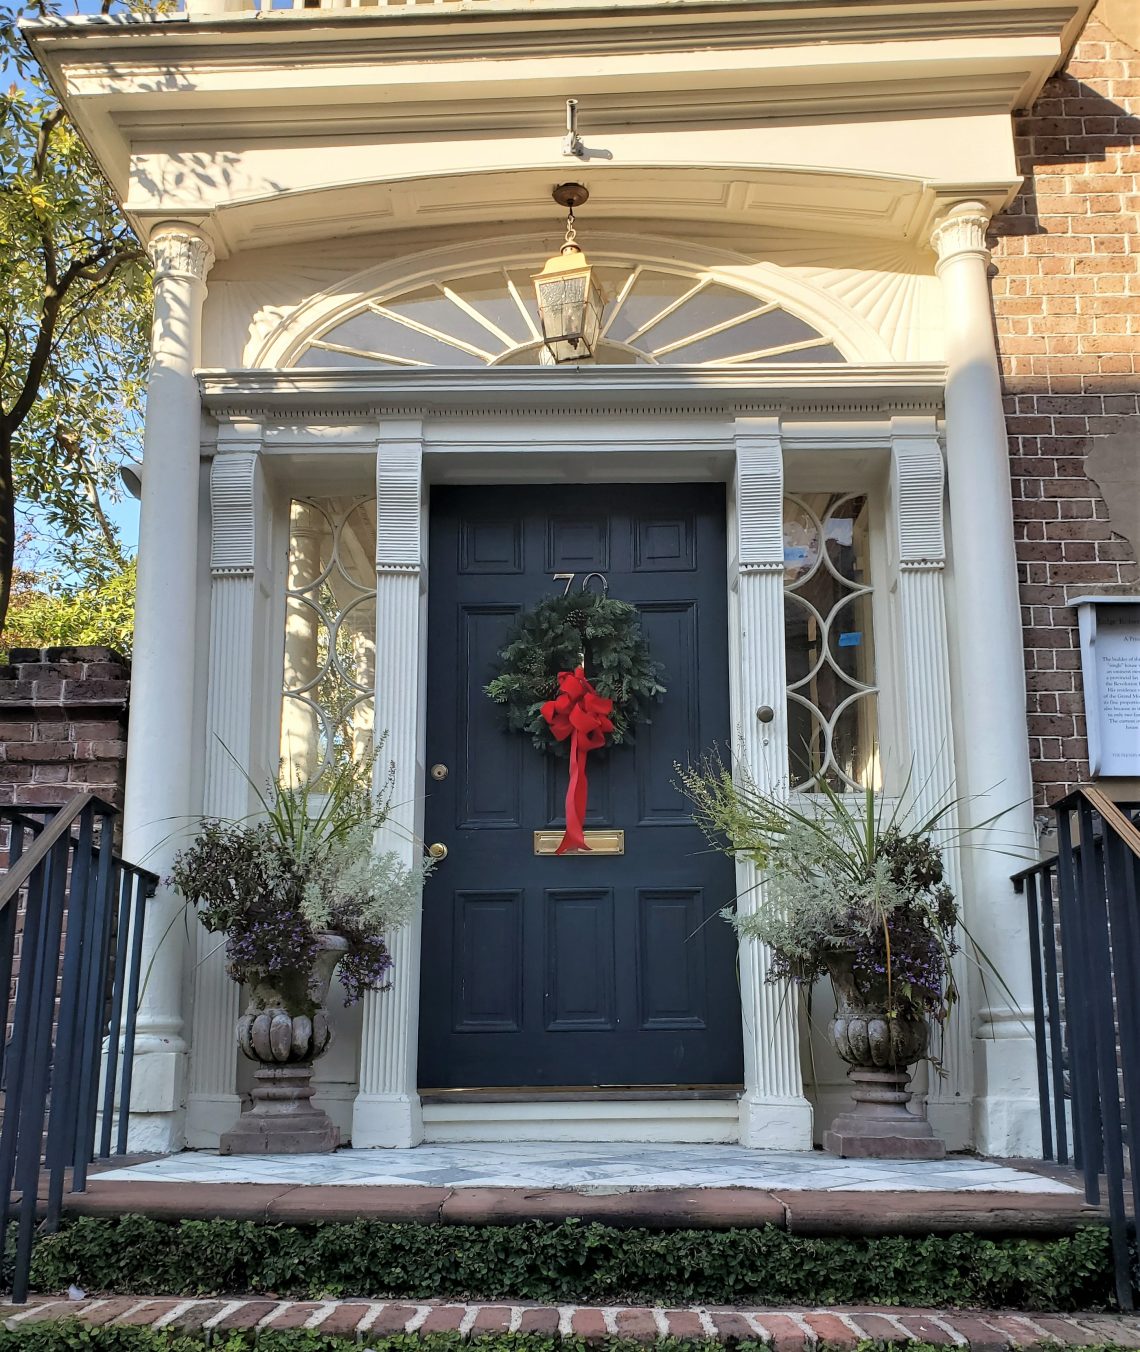 This good looking door belongs to the Robert Pringle House on Tradd Street, built in 1774. A Victorian bay window, facing the street, was later added to the house that distinguishes it from most large single houses of that era.